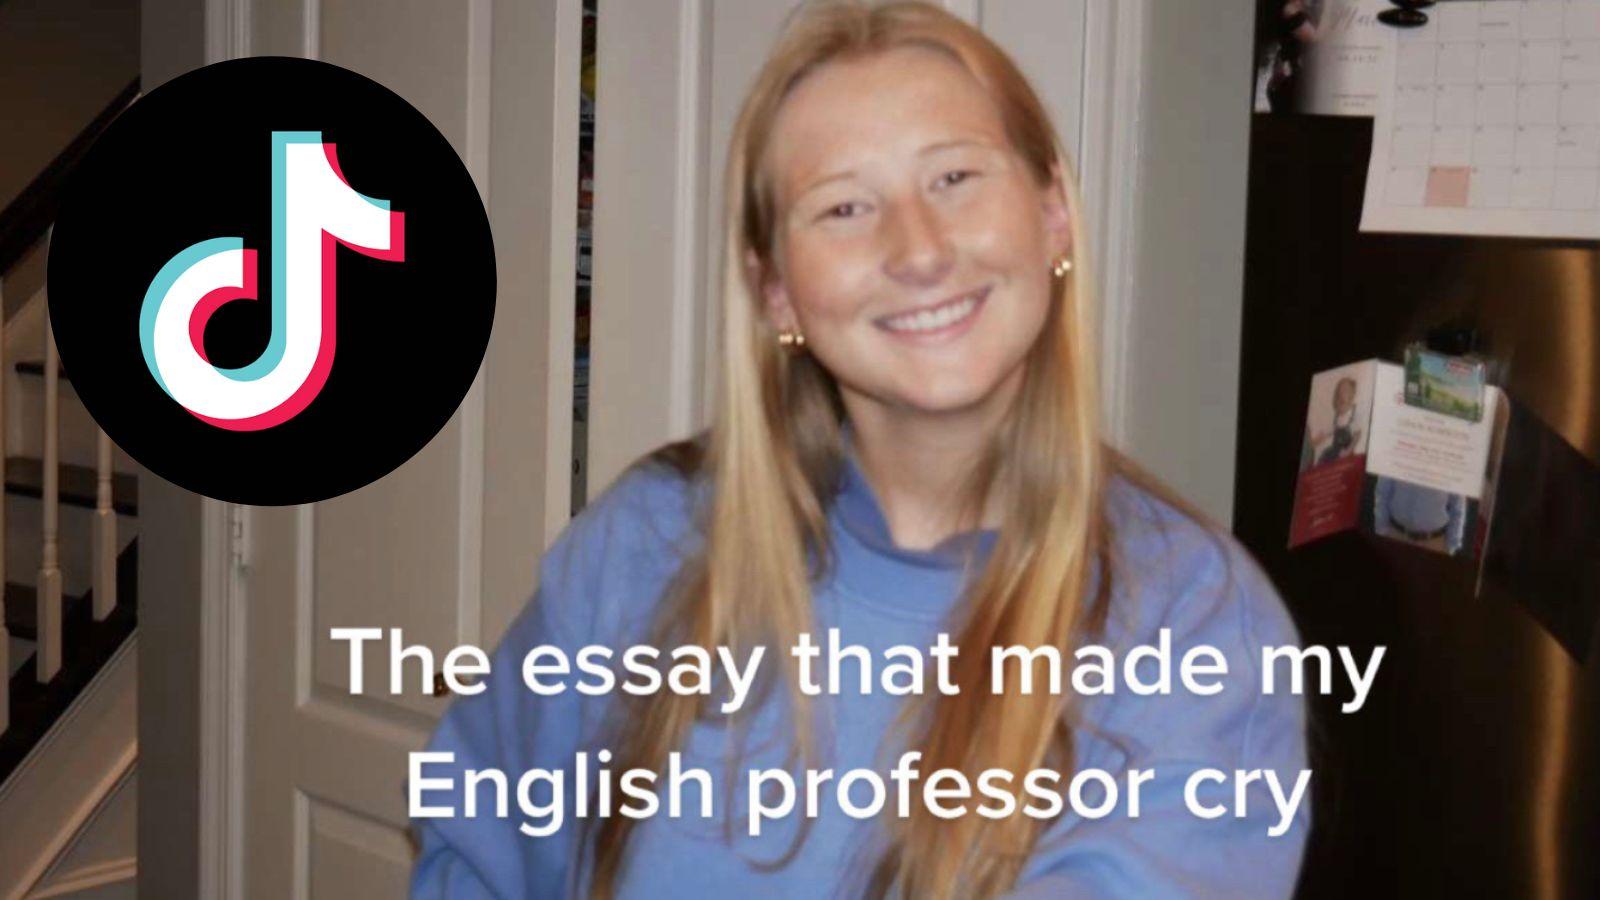 an essay that made my english professor cry